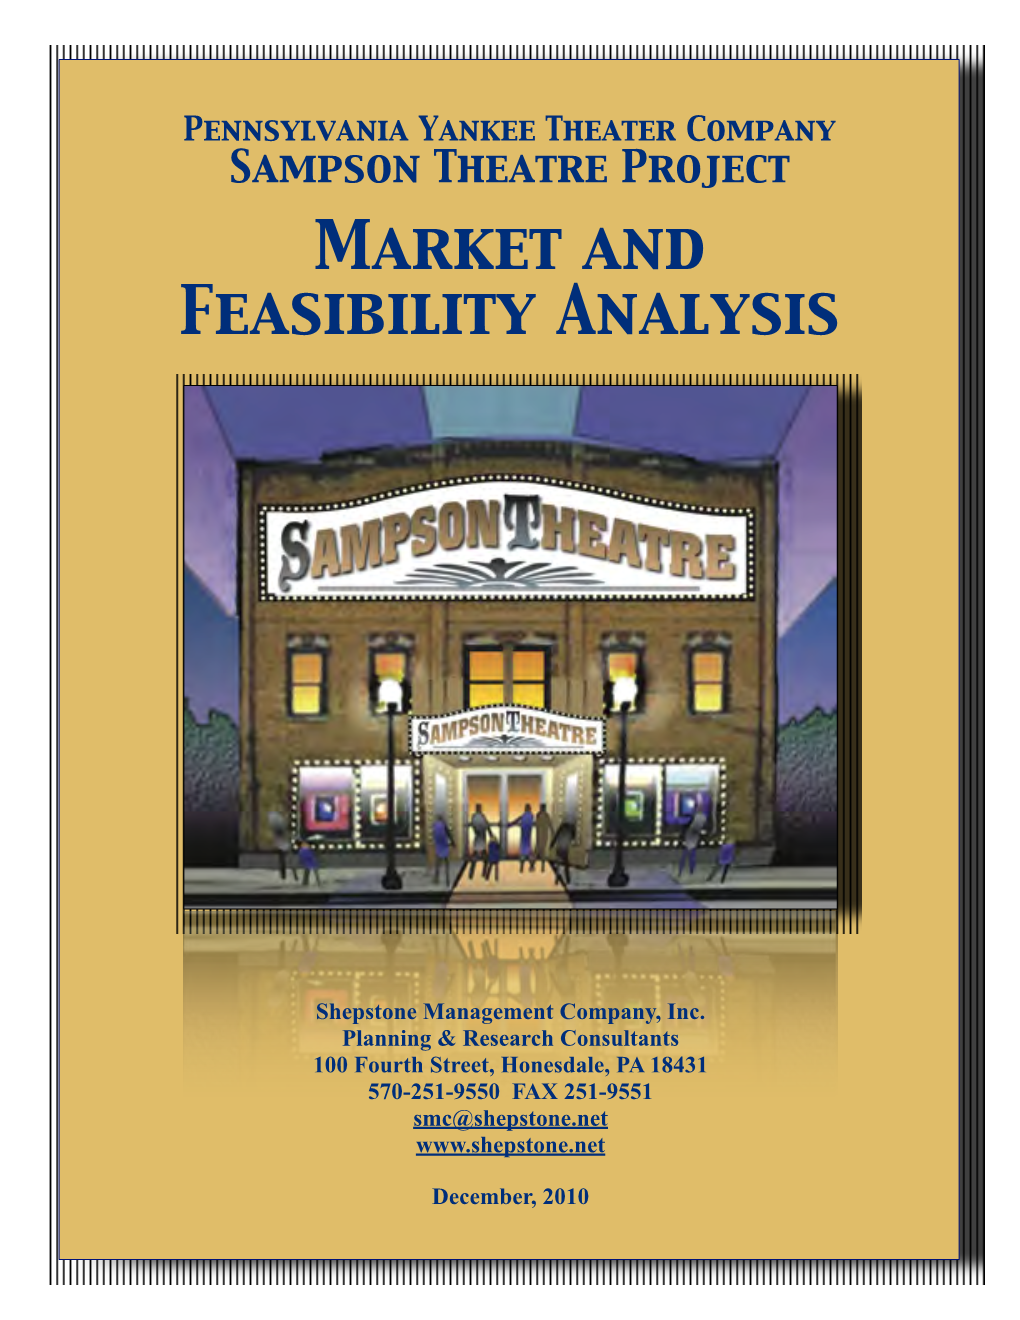 Sampson Theater Market and Feasibility Analysis